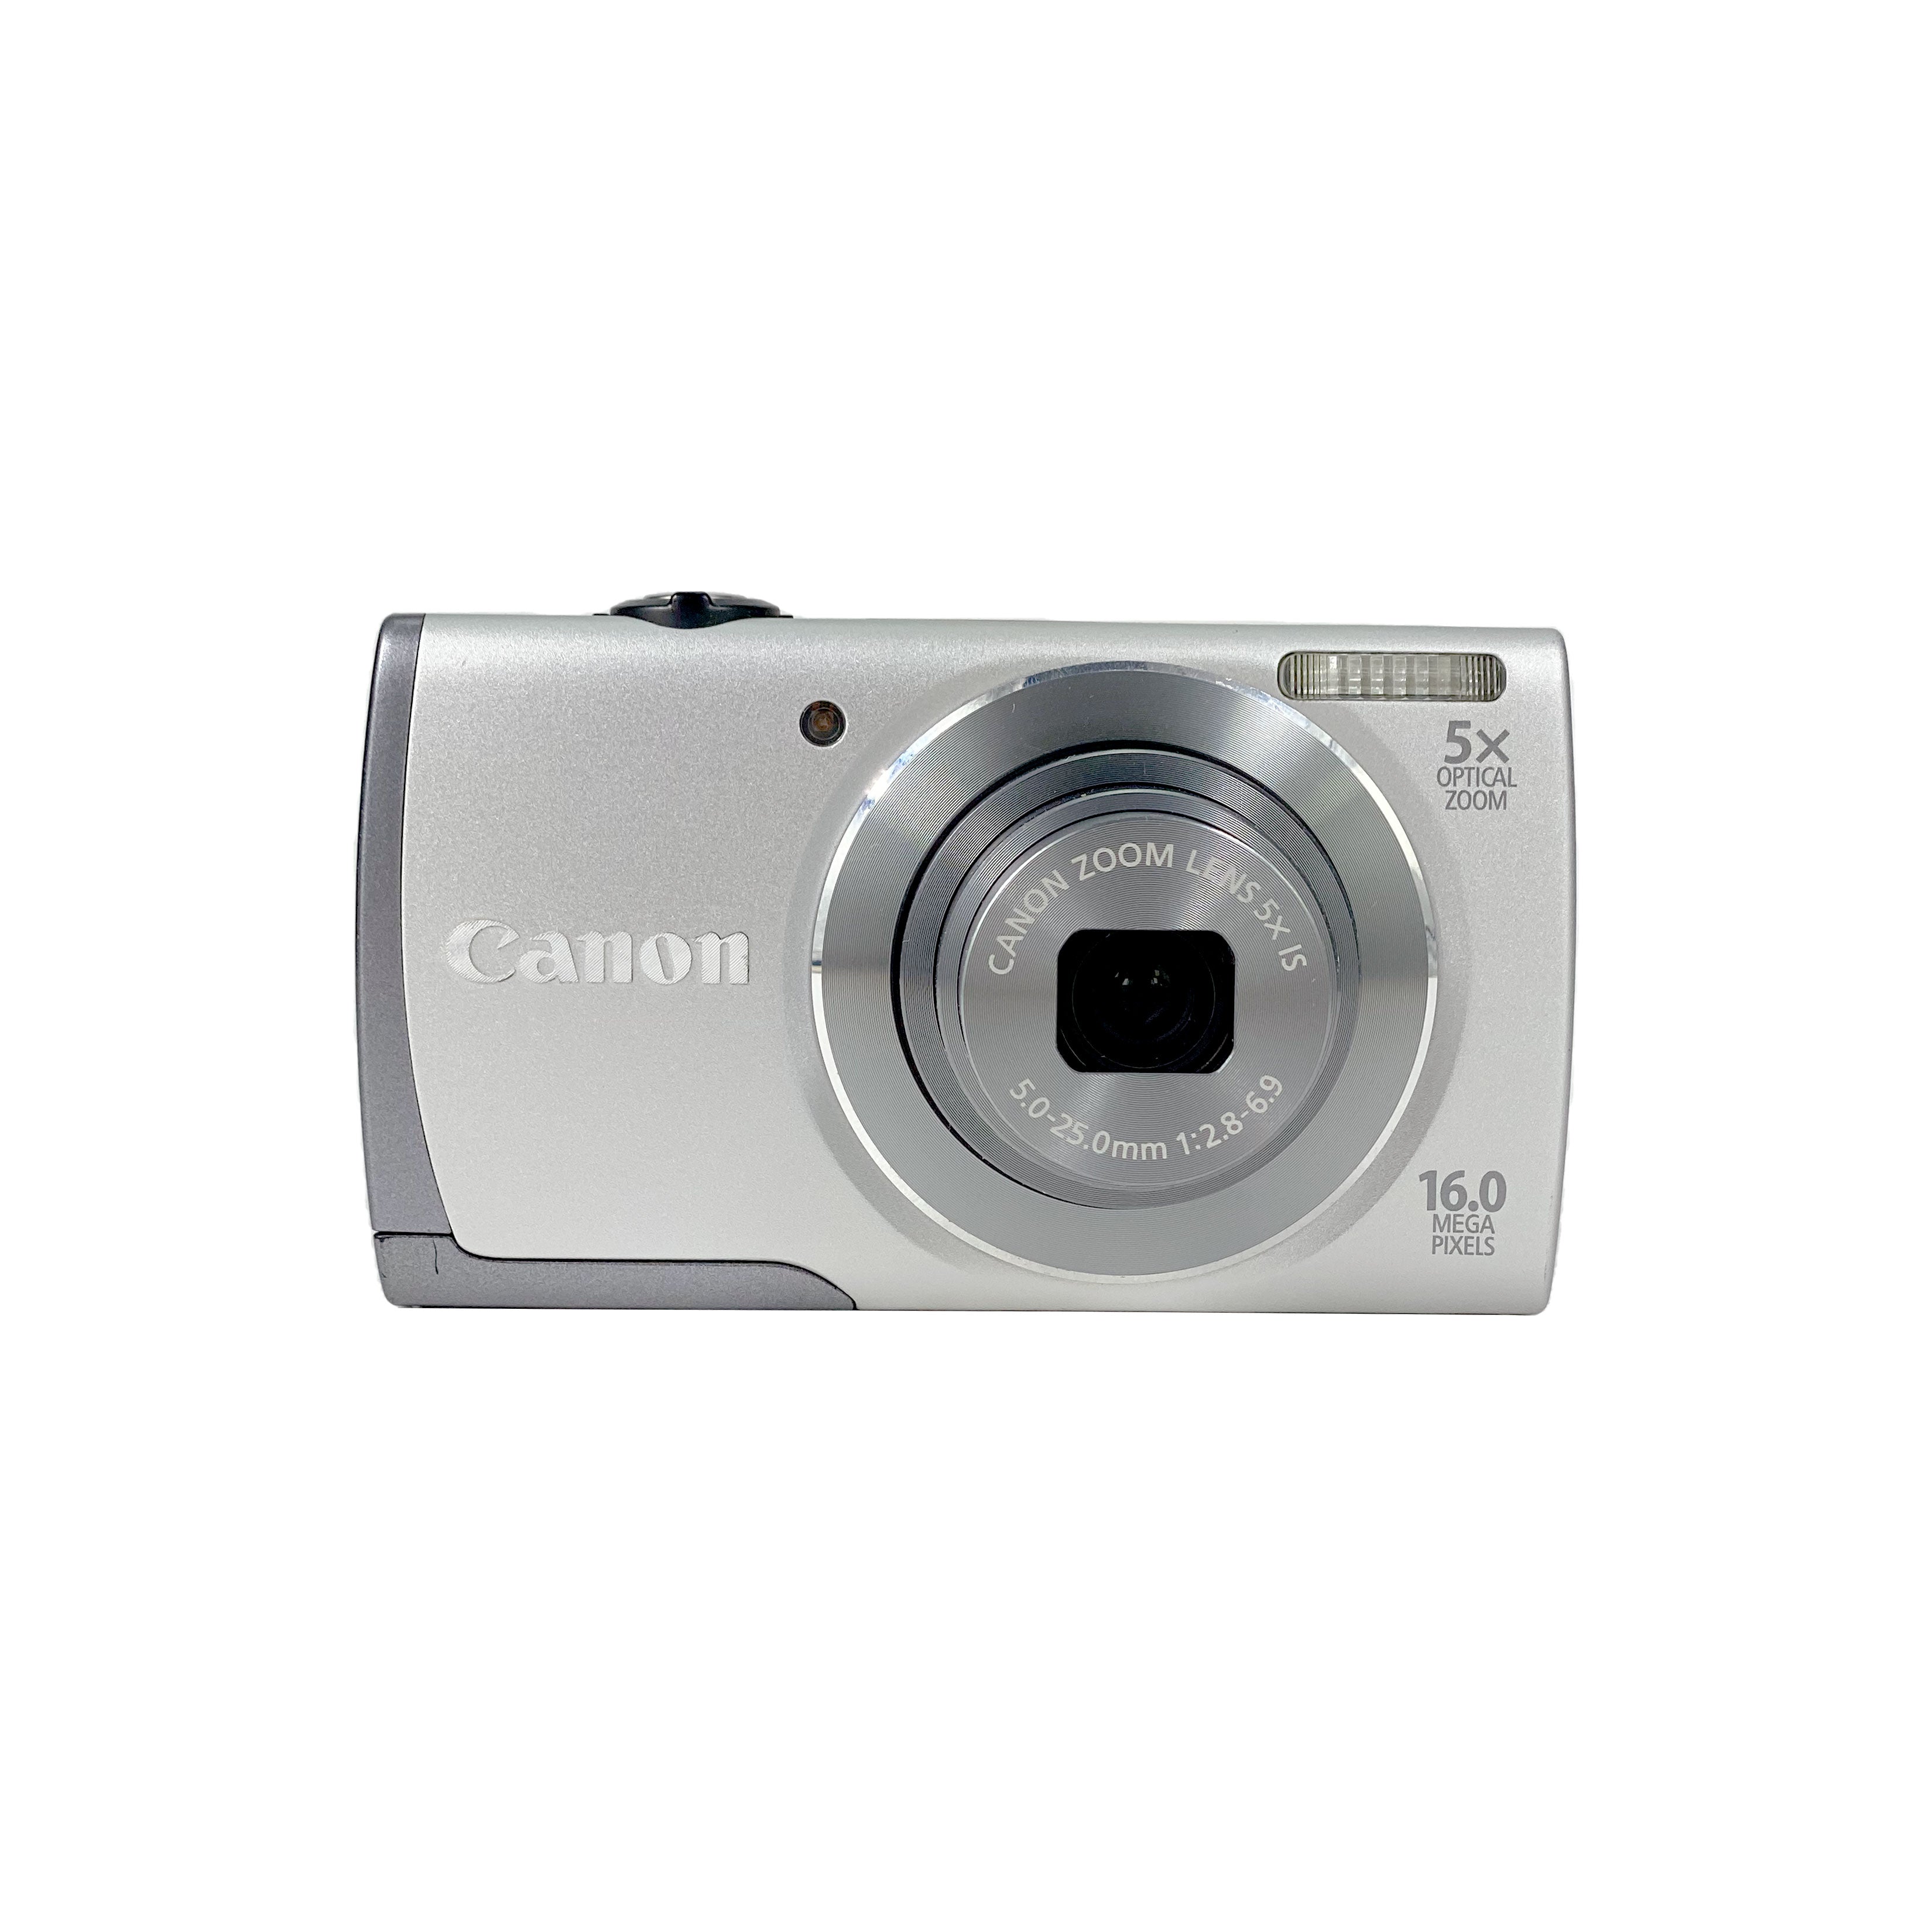 Canon Powershot A3500 IS Digital Compact